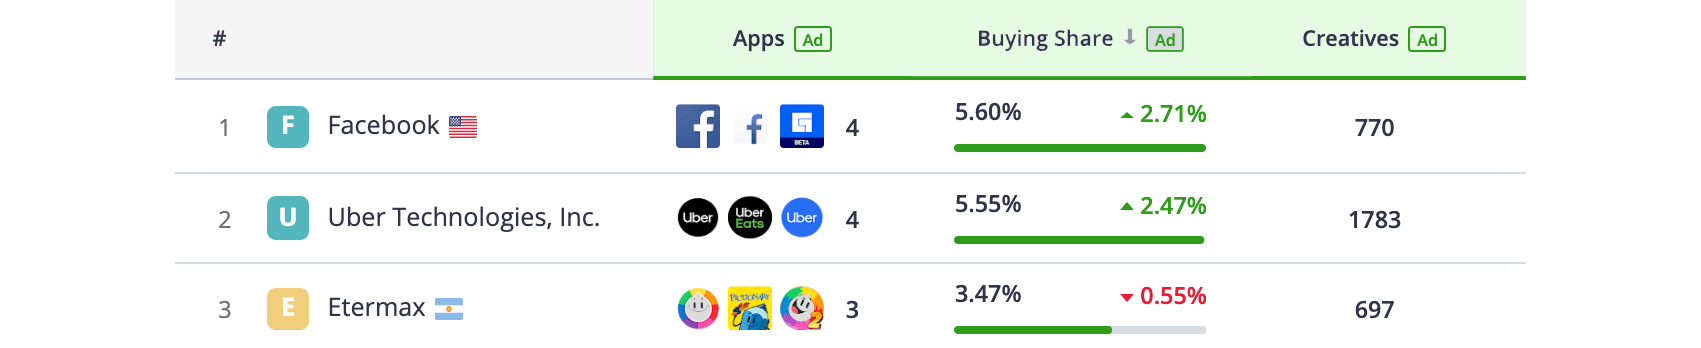 Top 3 Publishers, Android